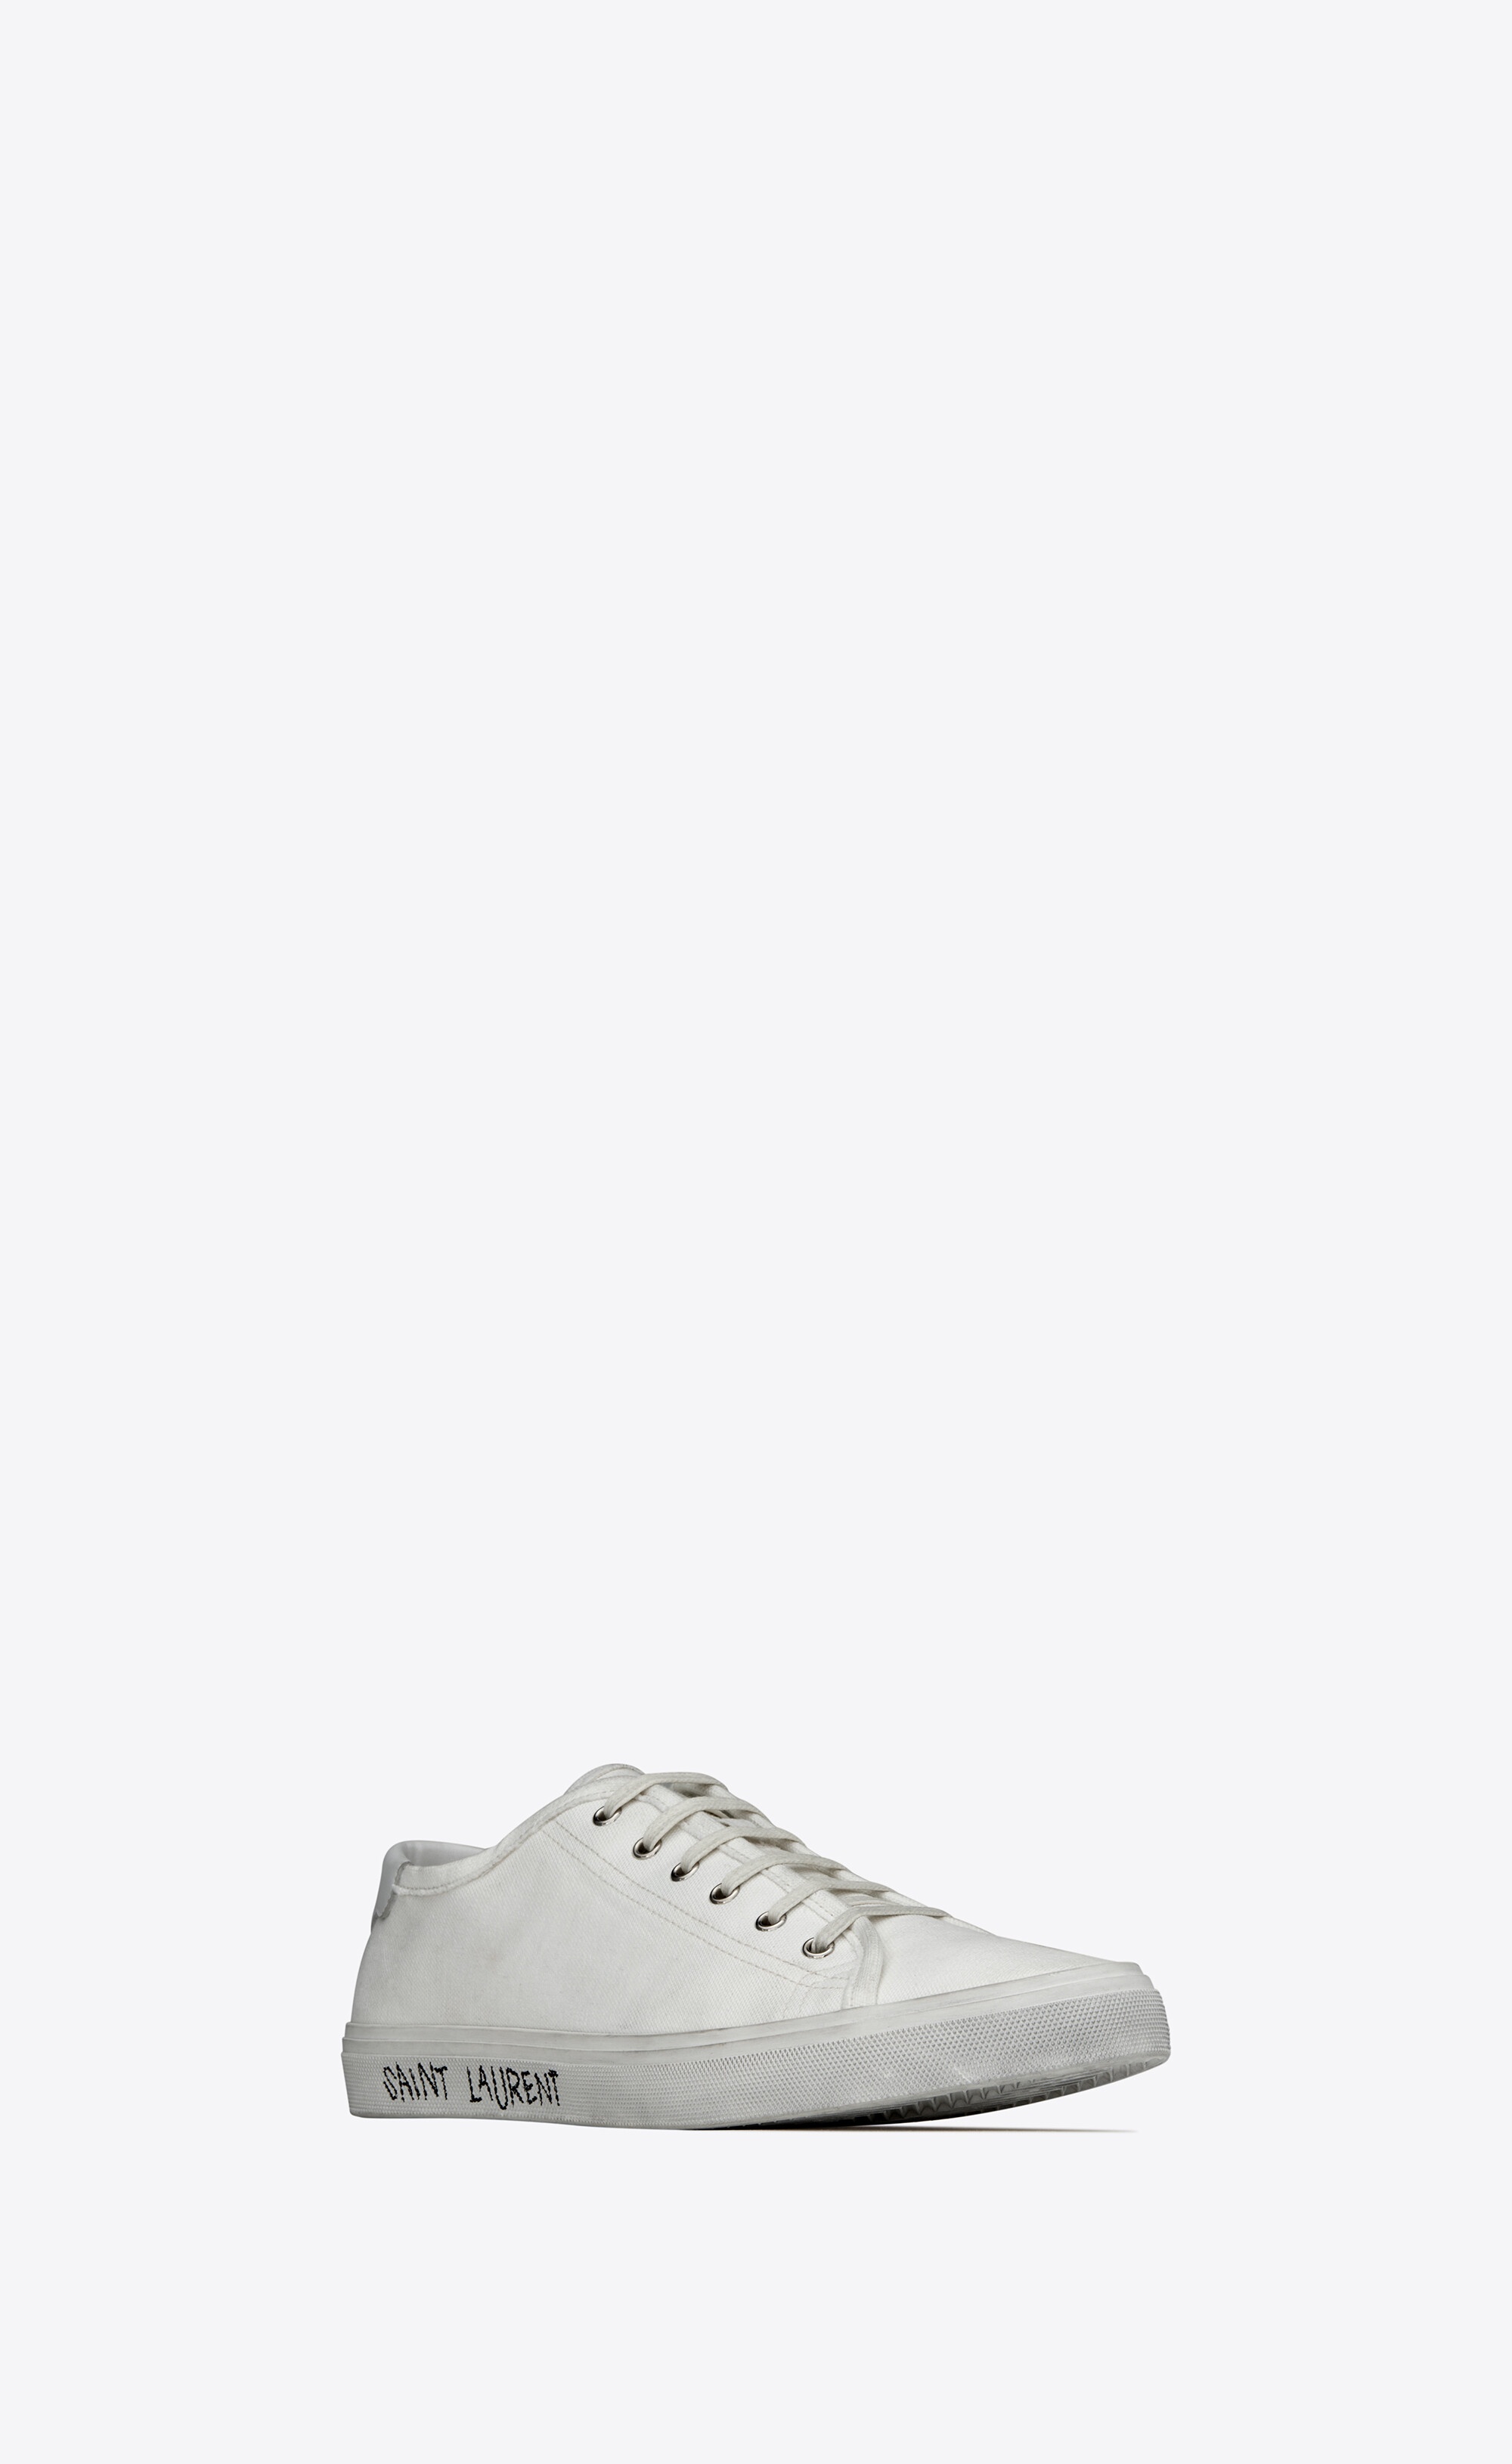 malibu sneakers in canvas and leather - 4